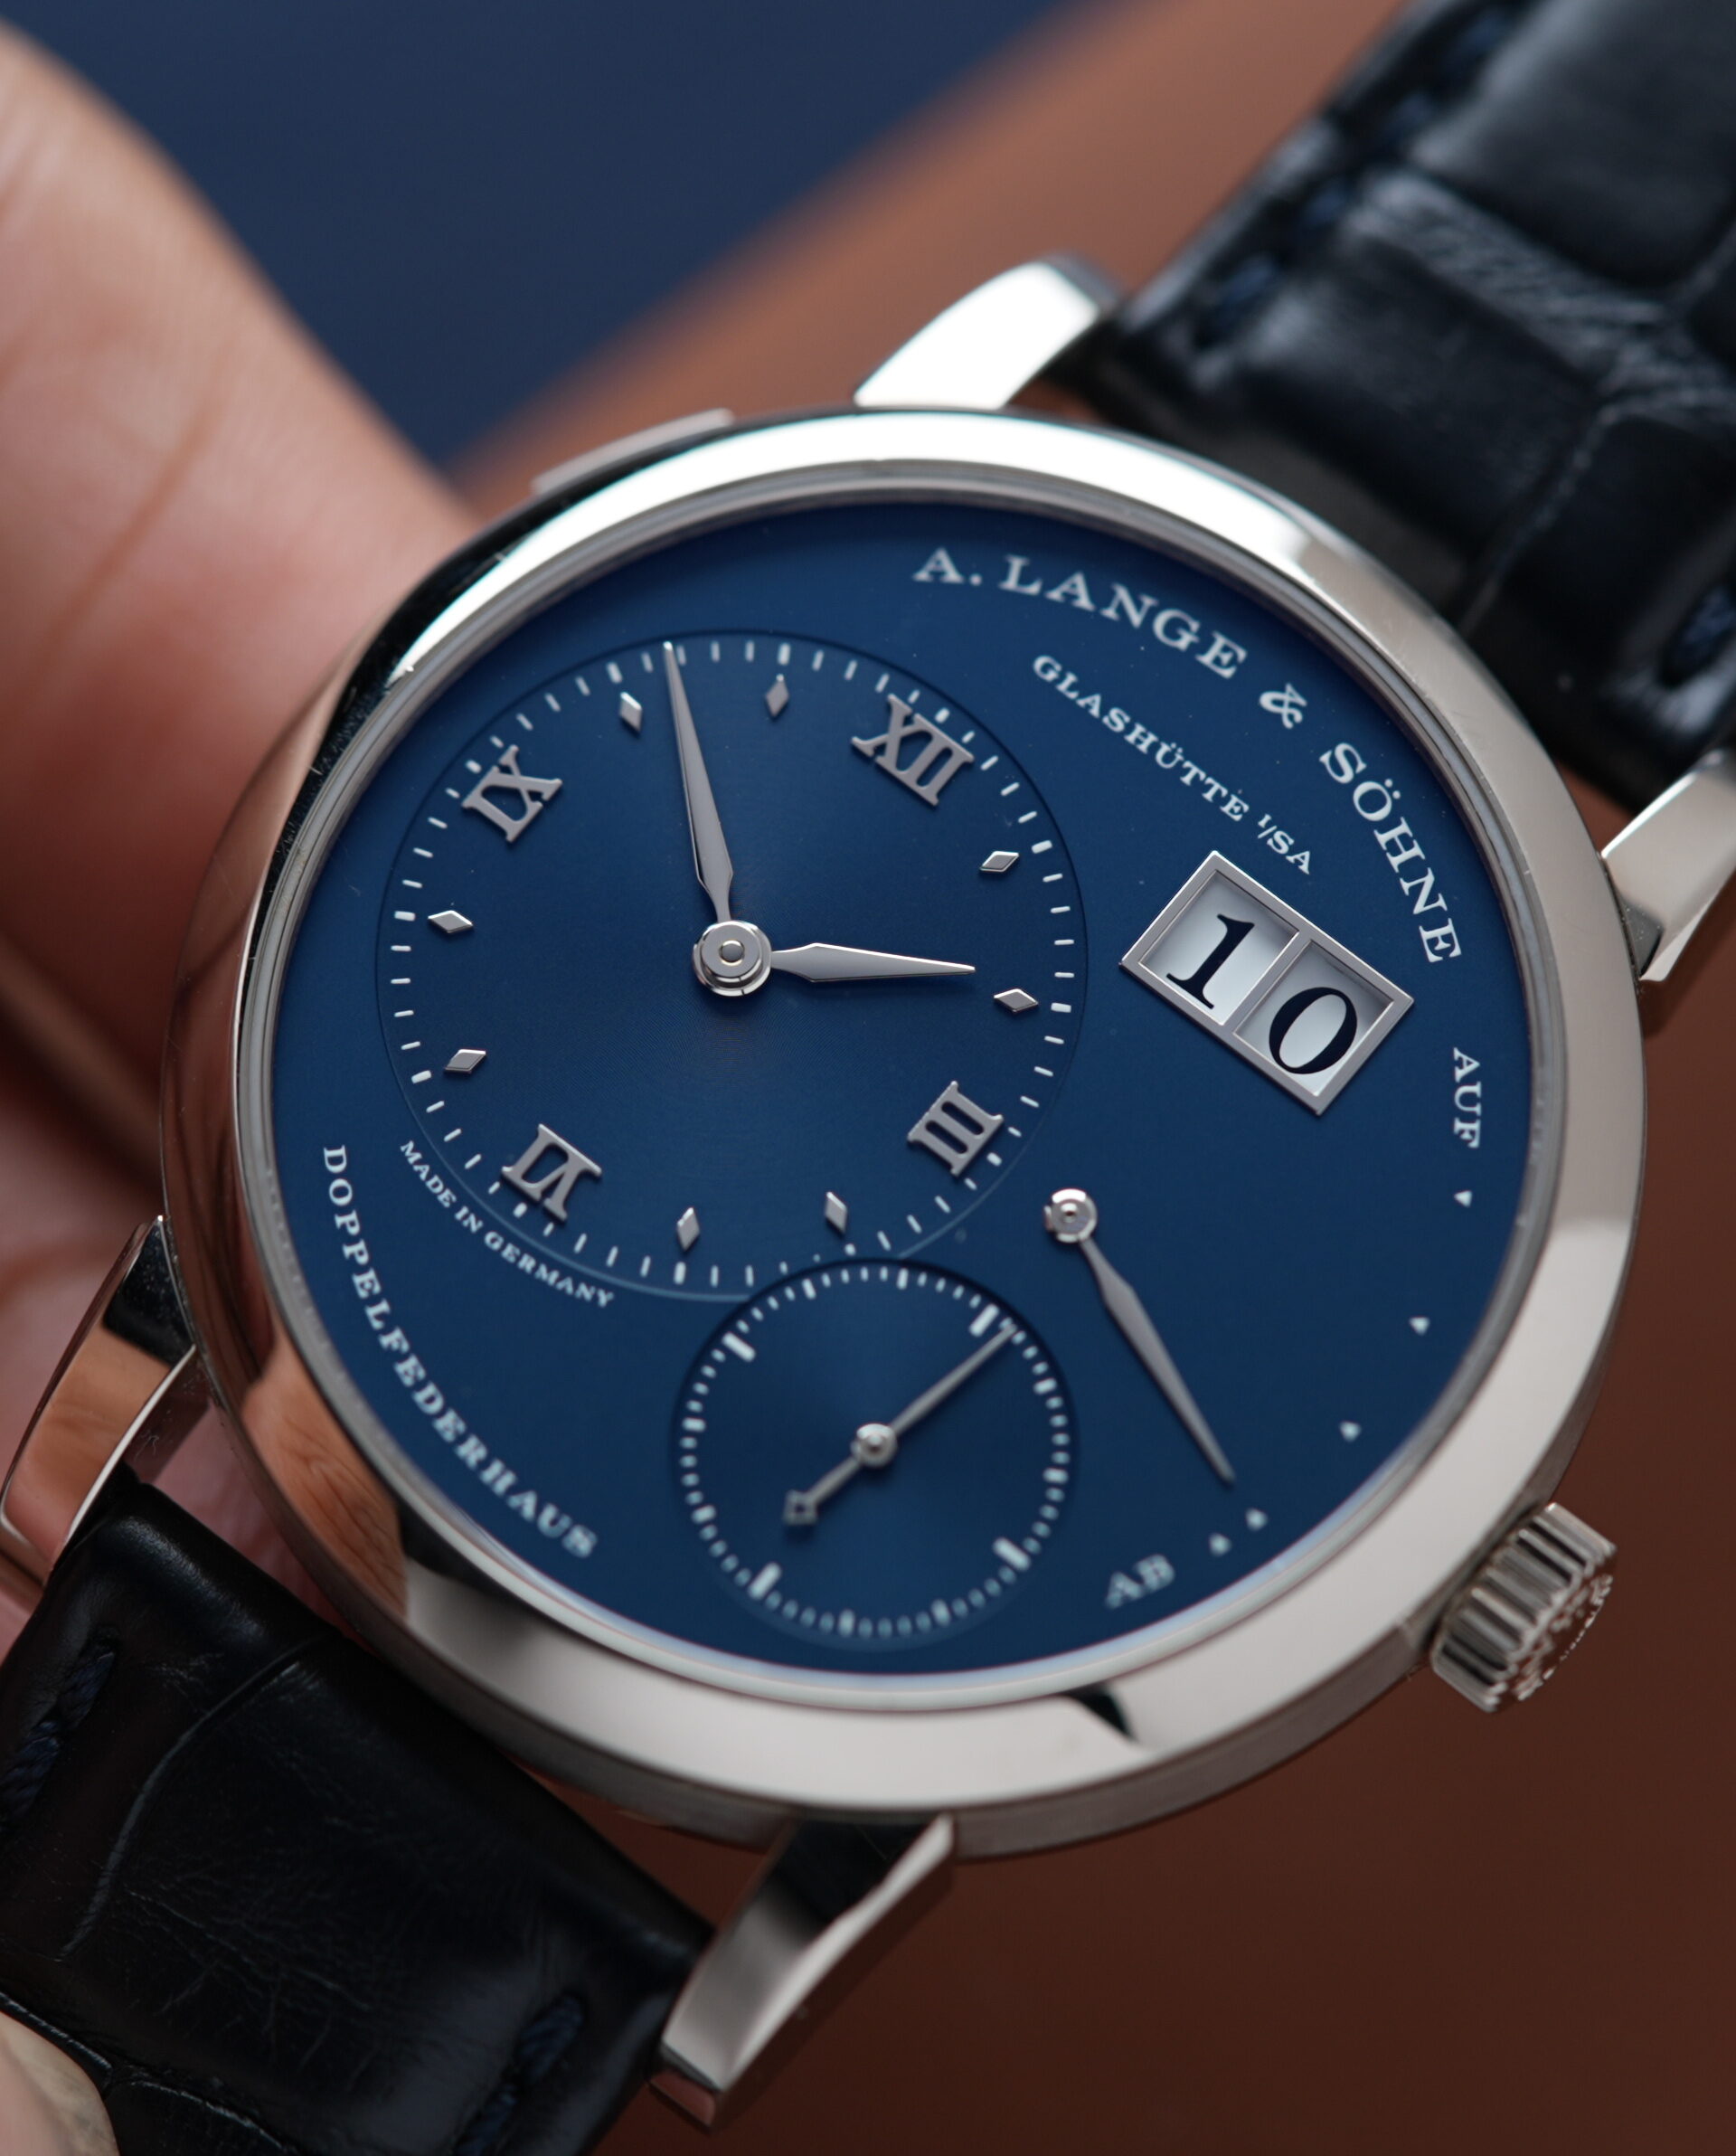 A. Lange & Söhne Lange 1 'Blue Series' 191.028 White Gold watch being held in hand.